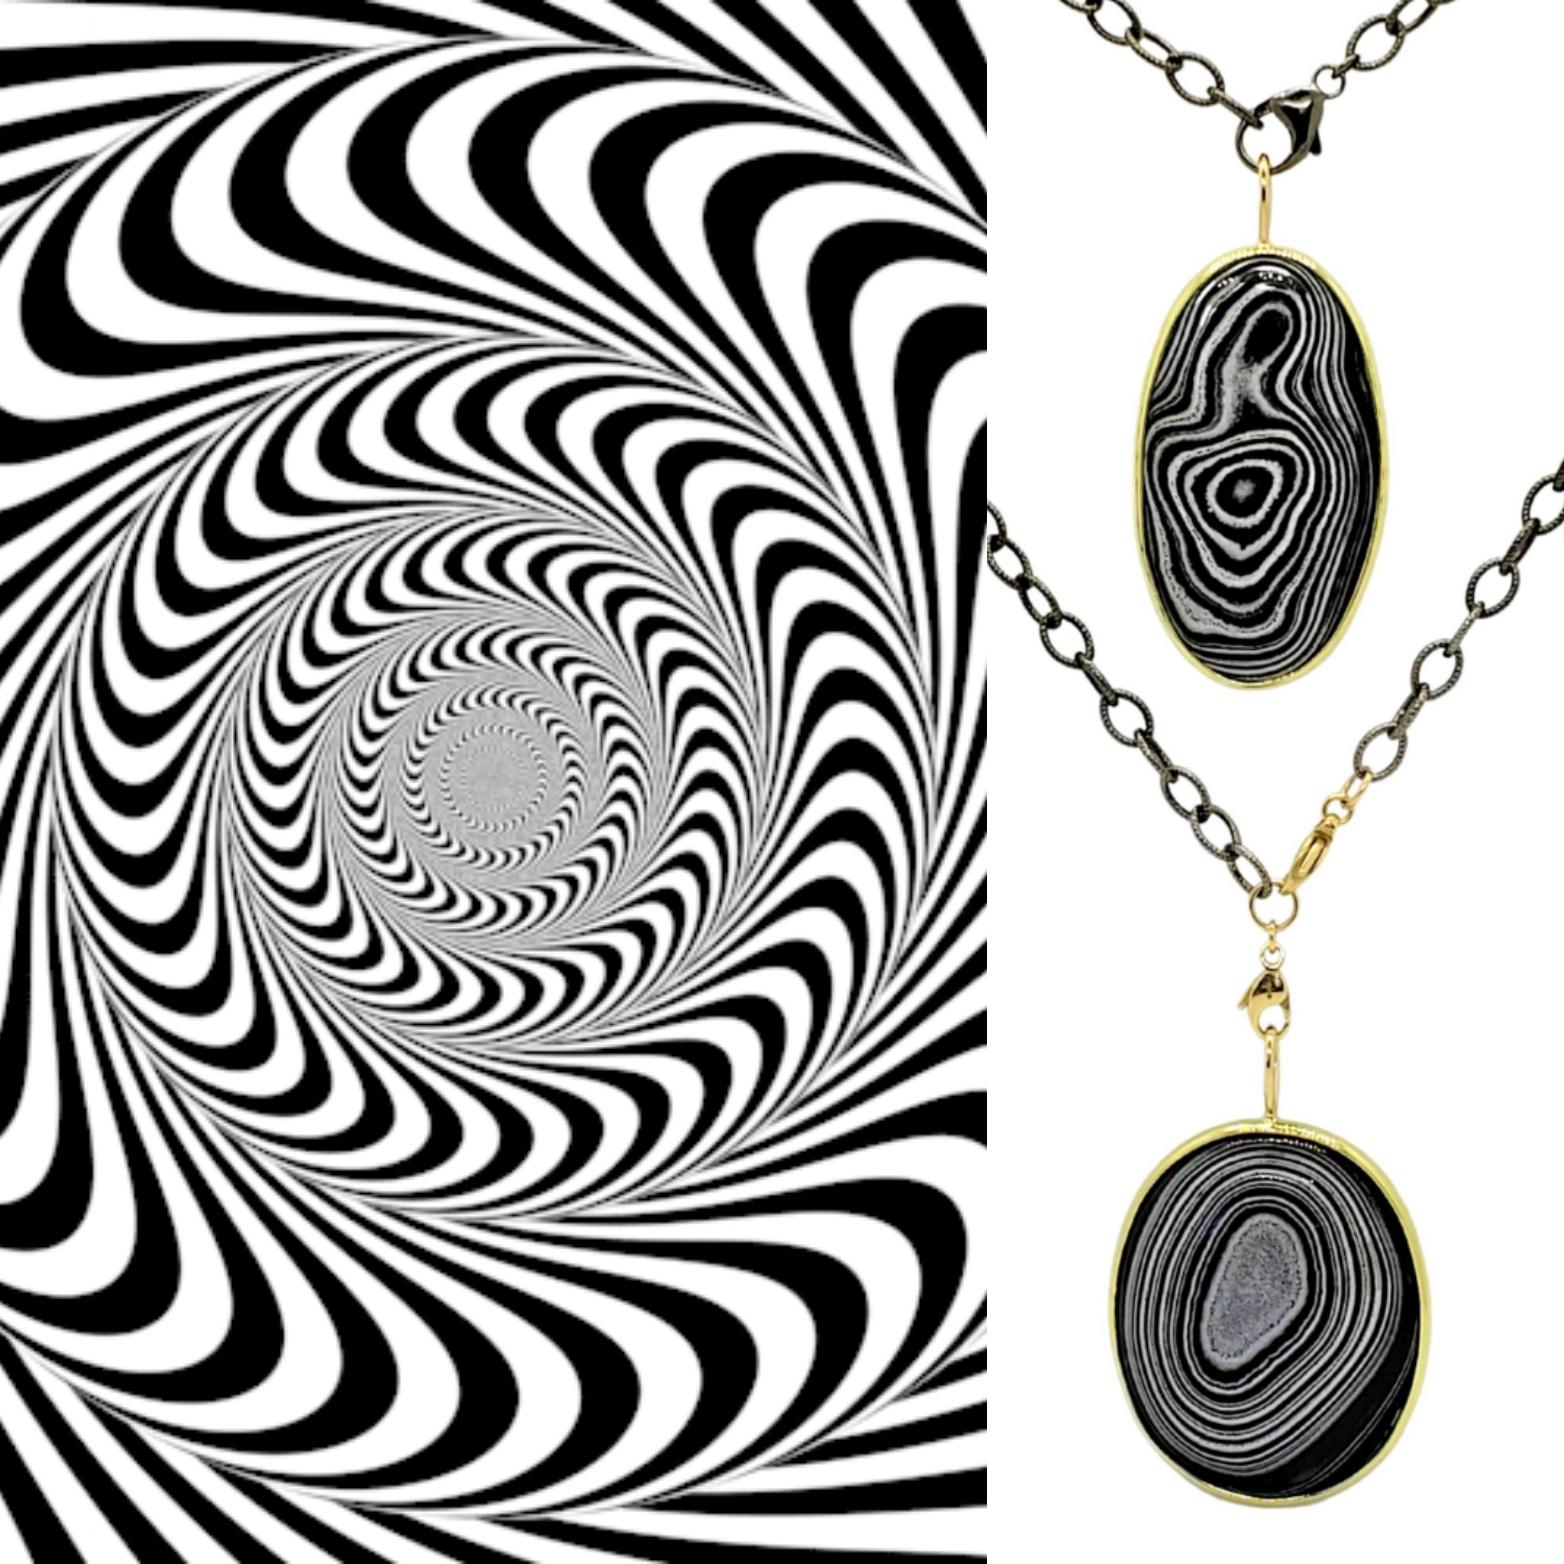 When we came across some black and white unique gemstones from Mexico, we jumped to buy. The natural optical Art patterns are fabulous. The Necklace is non gender for everyone. On the reverse side, there is a different pattern. No two gems are